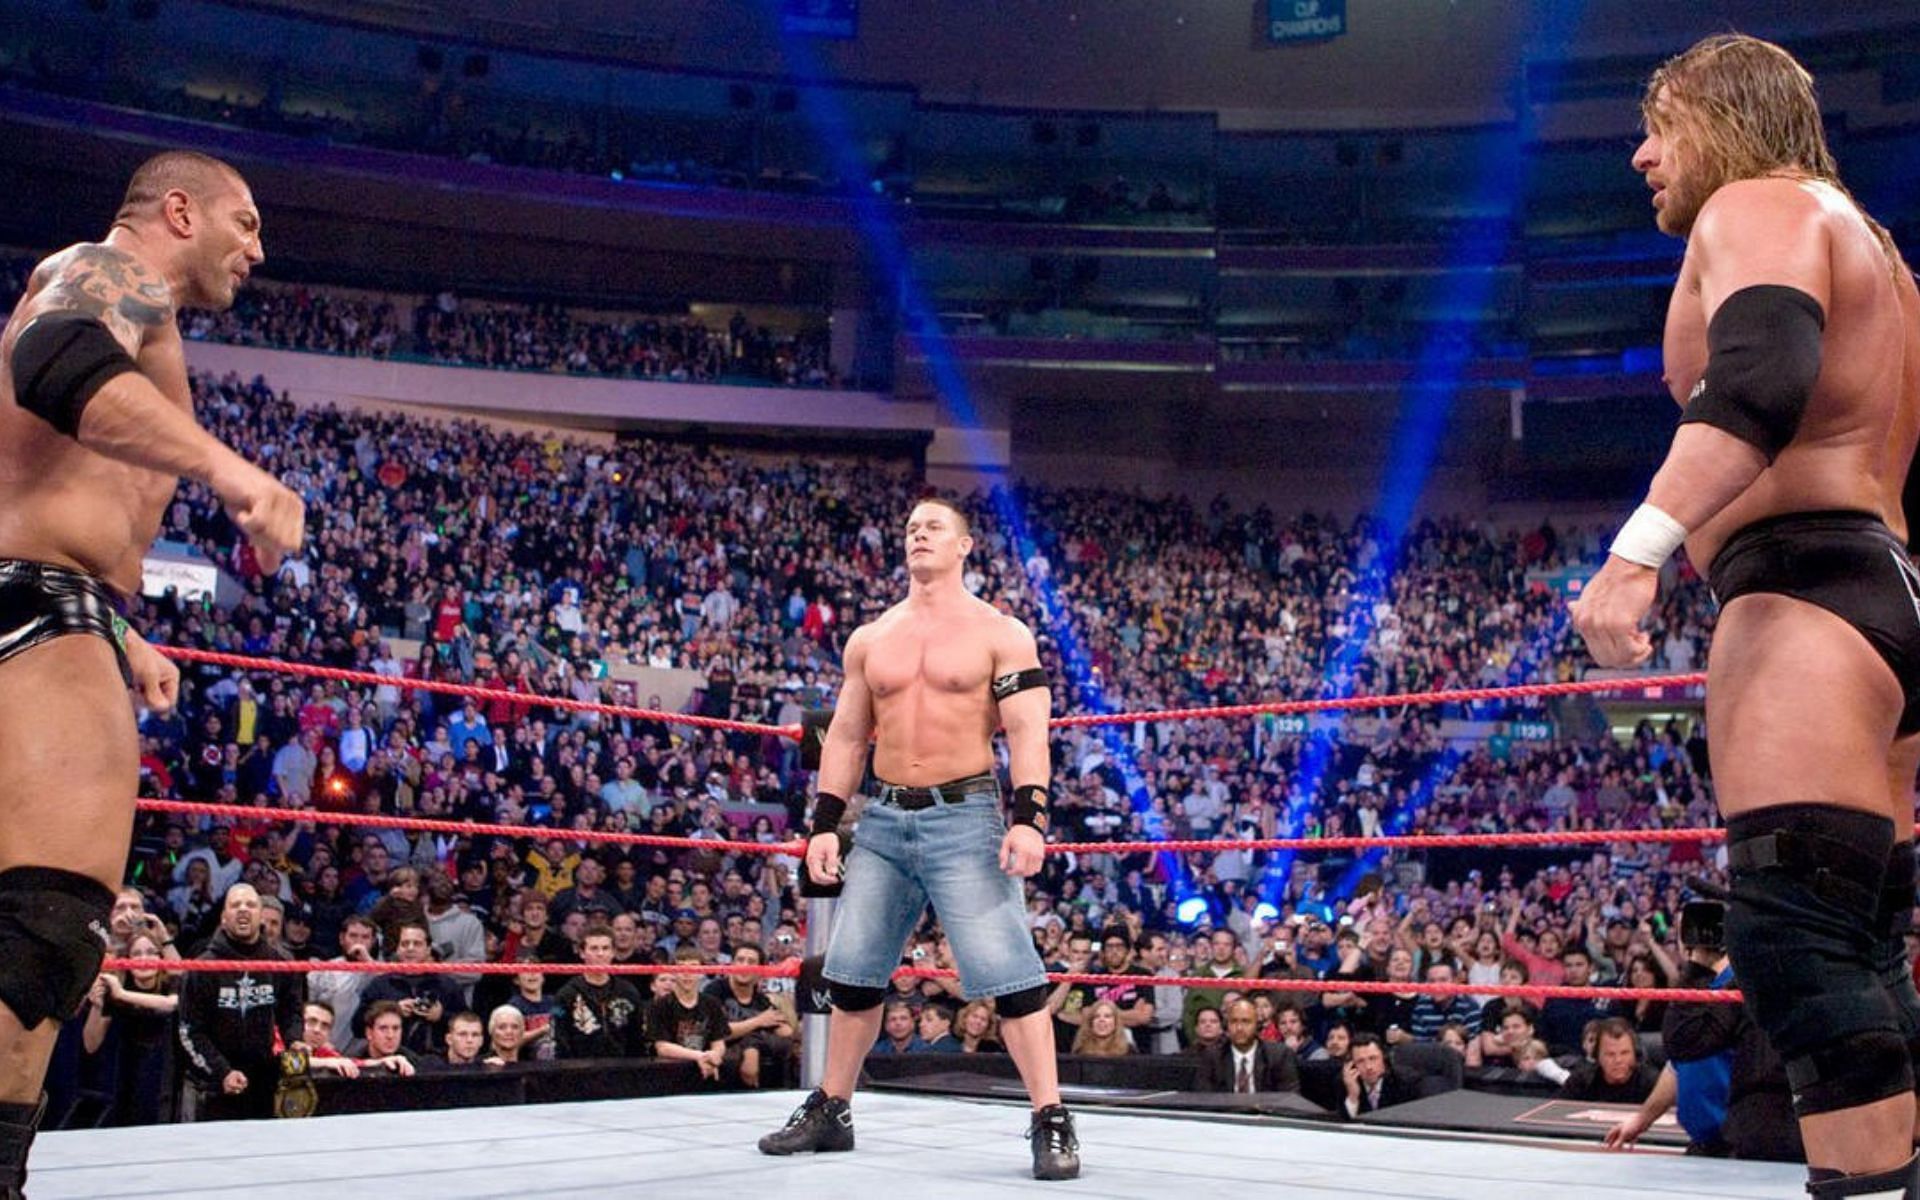 John Cena is having a showdown with Batista and Triple H.